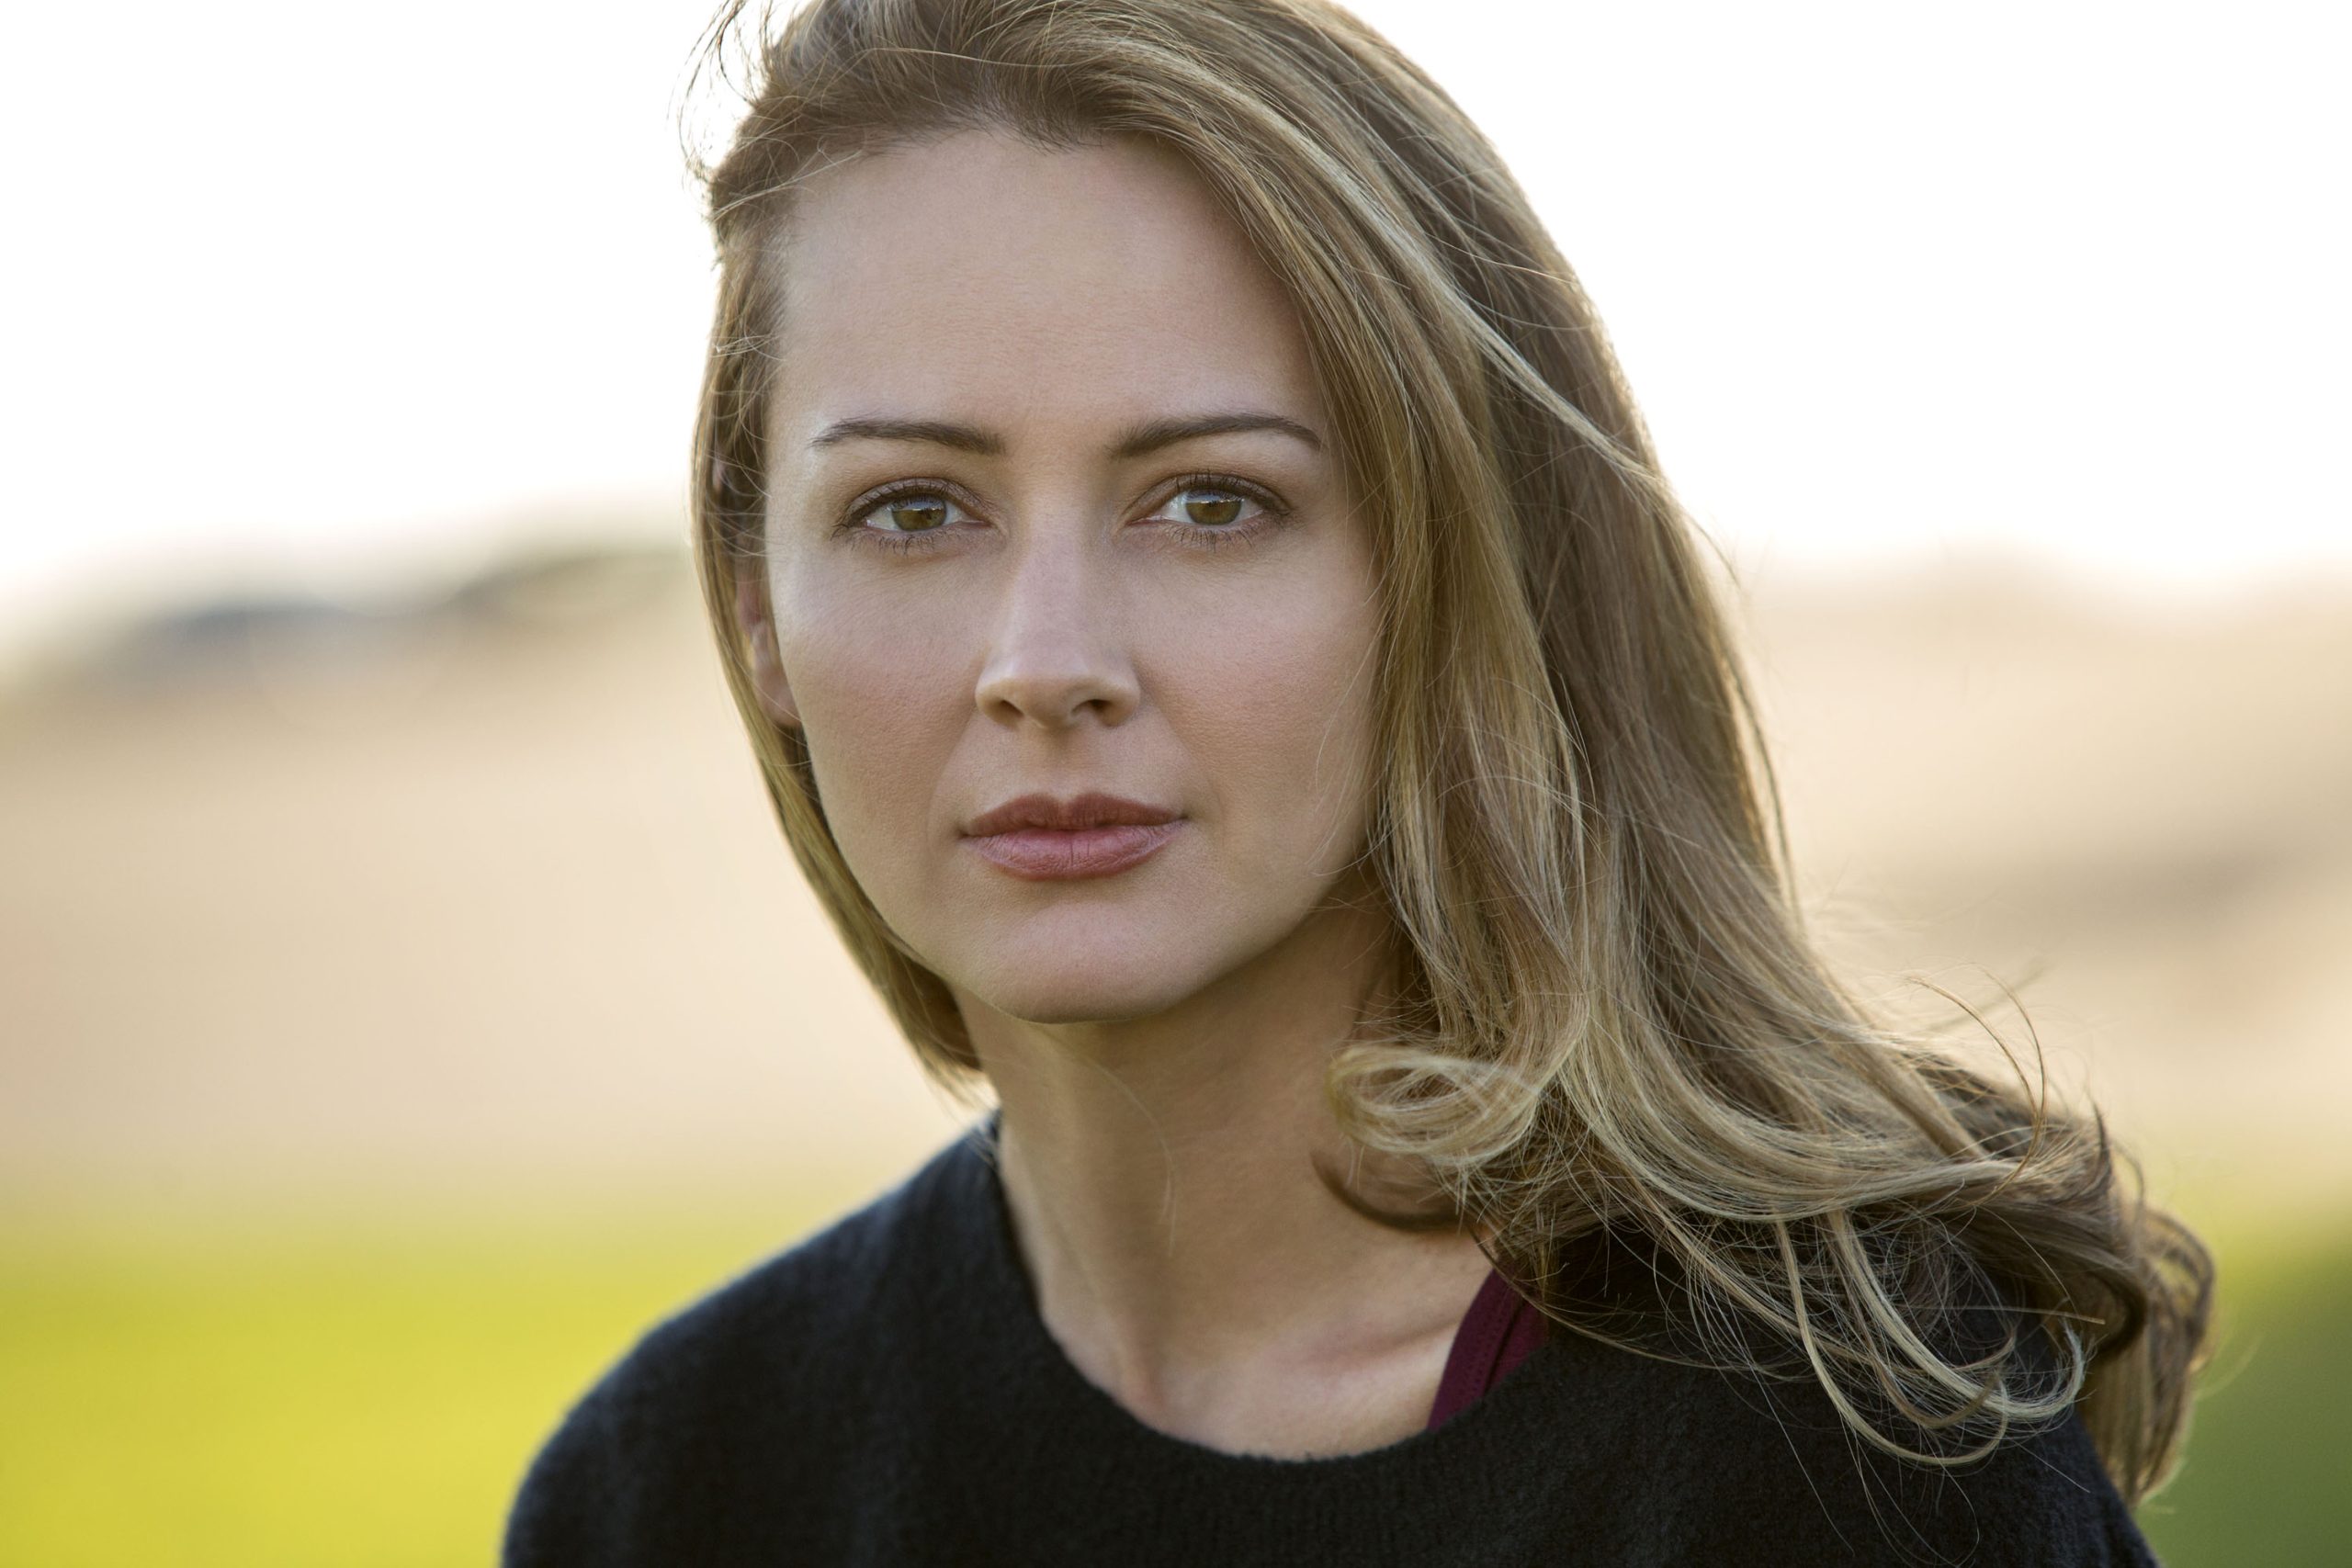 Amy Acker Wiki, Bio, Age, Net Worth, and Other Facts